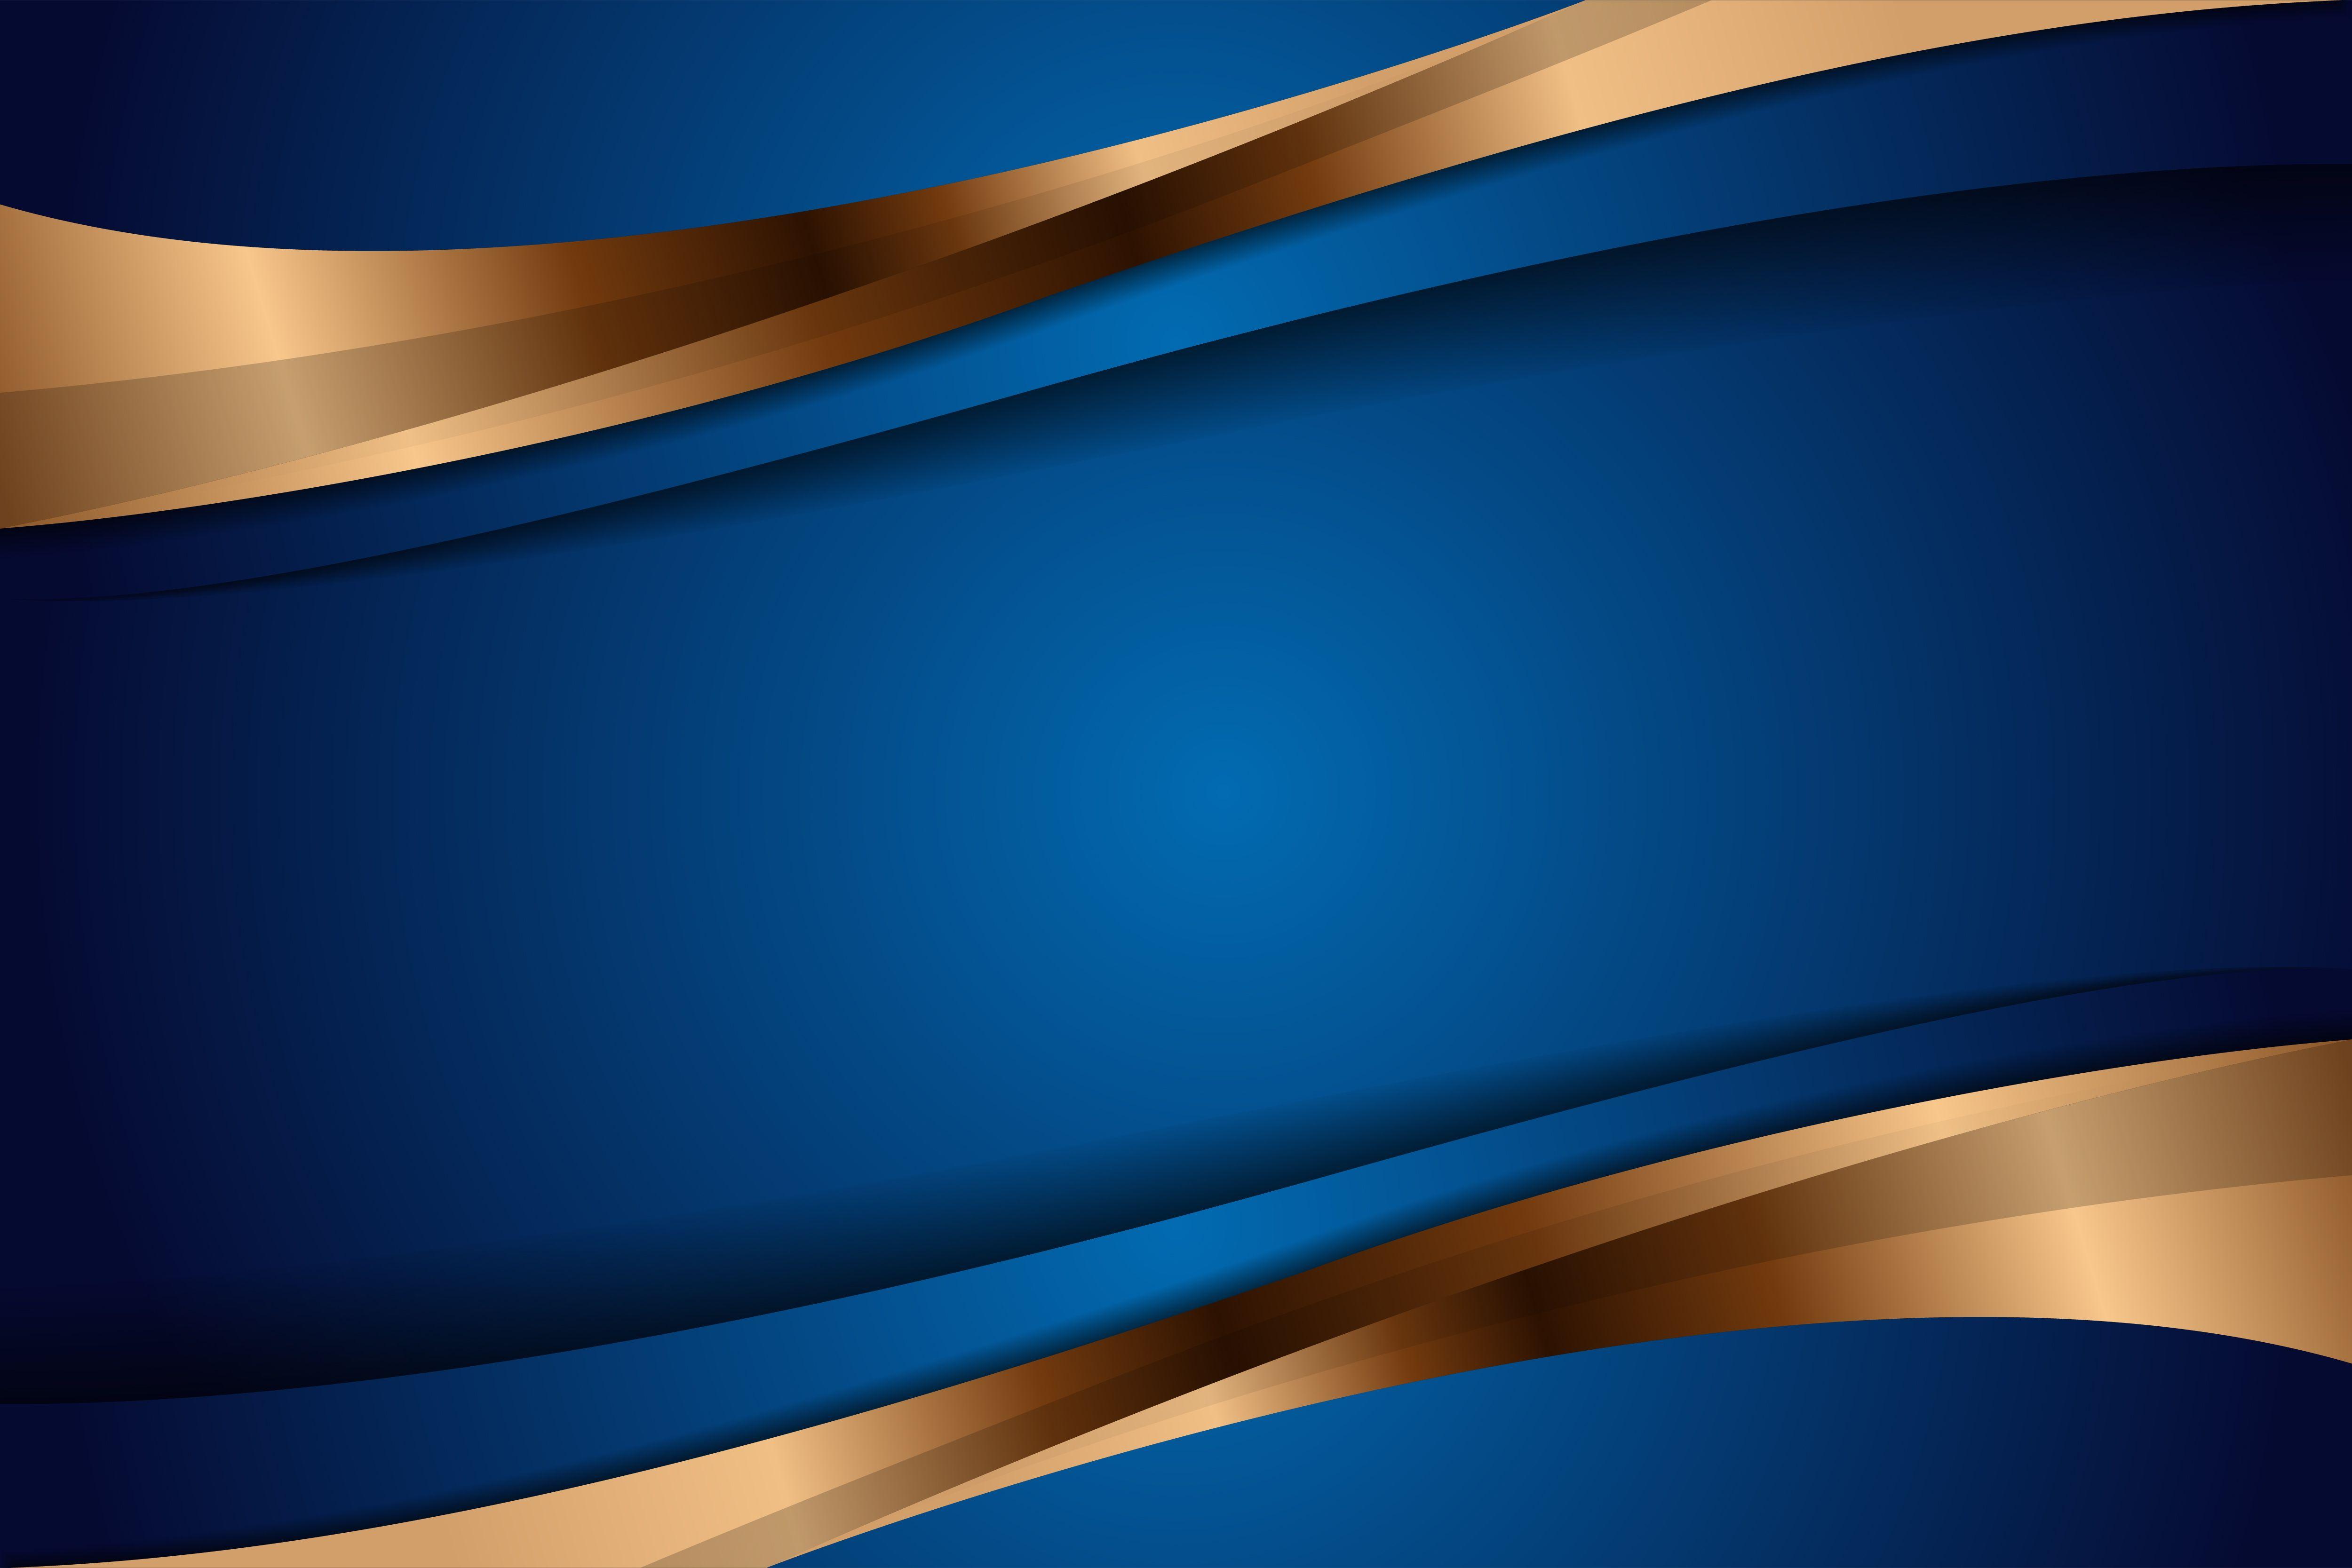 12 Best Blue and gold wallpaper ideas  blue and gold wallpaper geode art gold  wallpaper